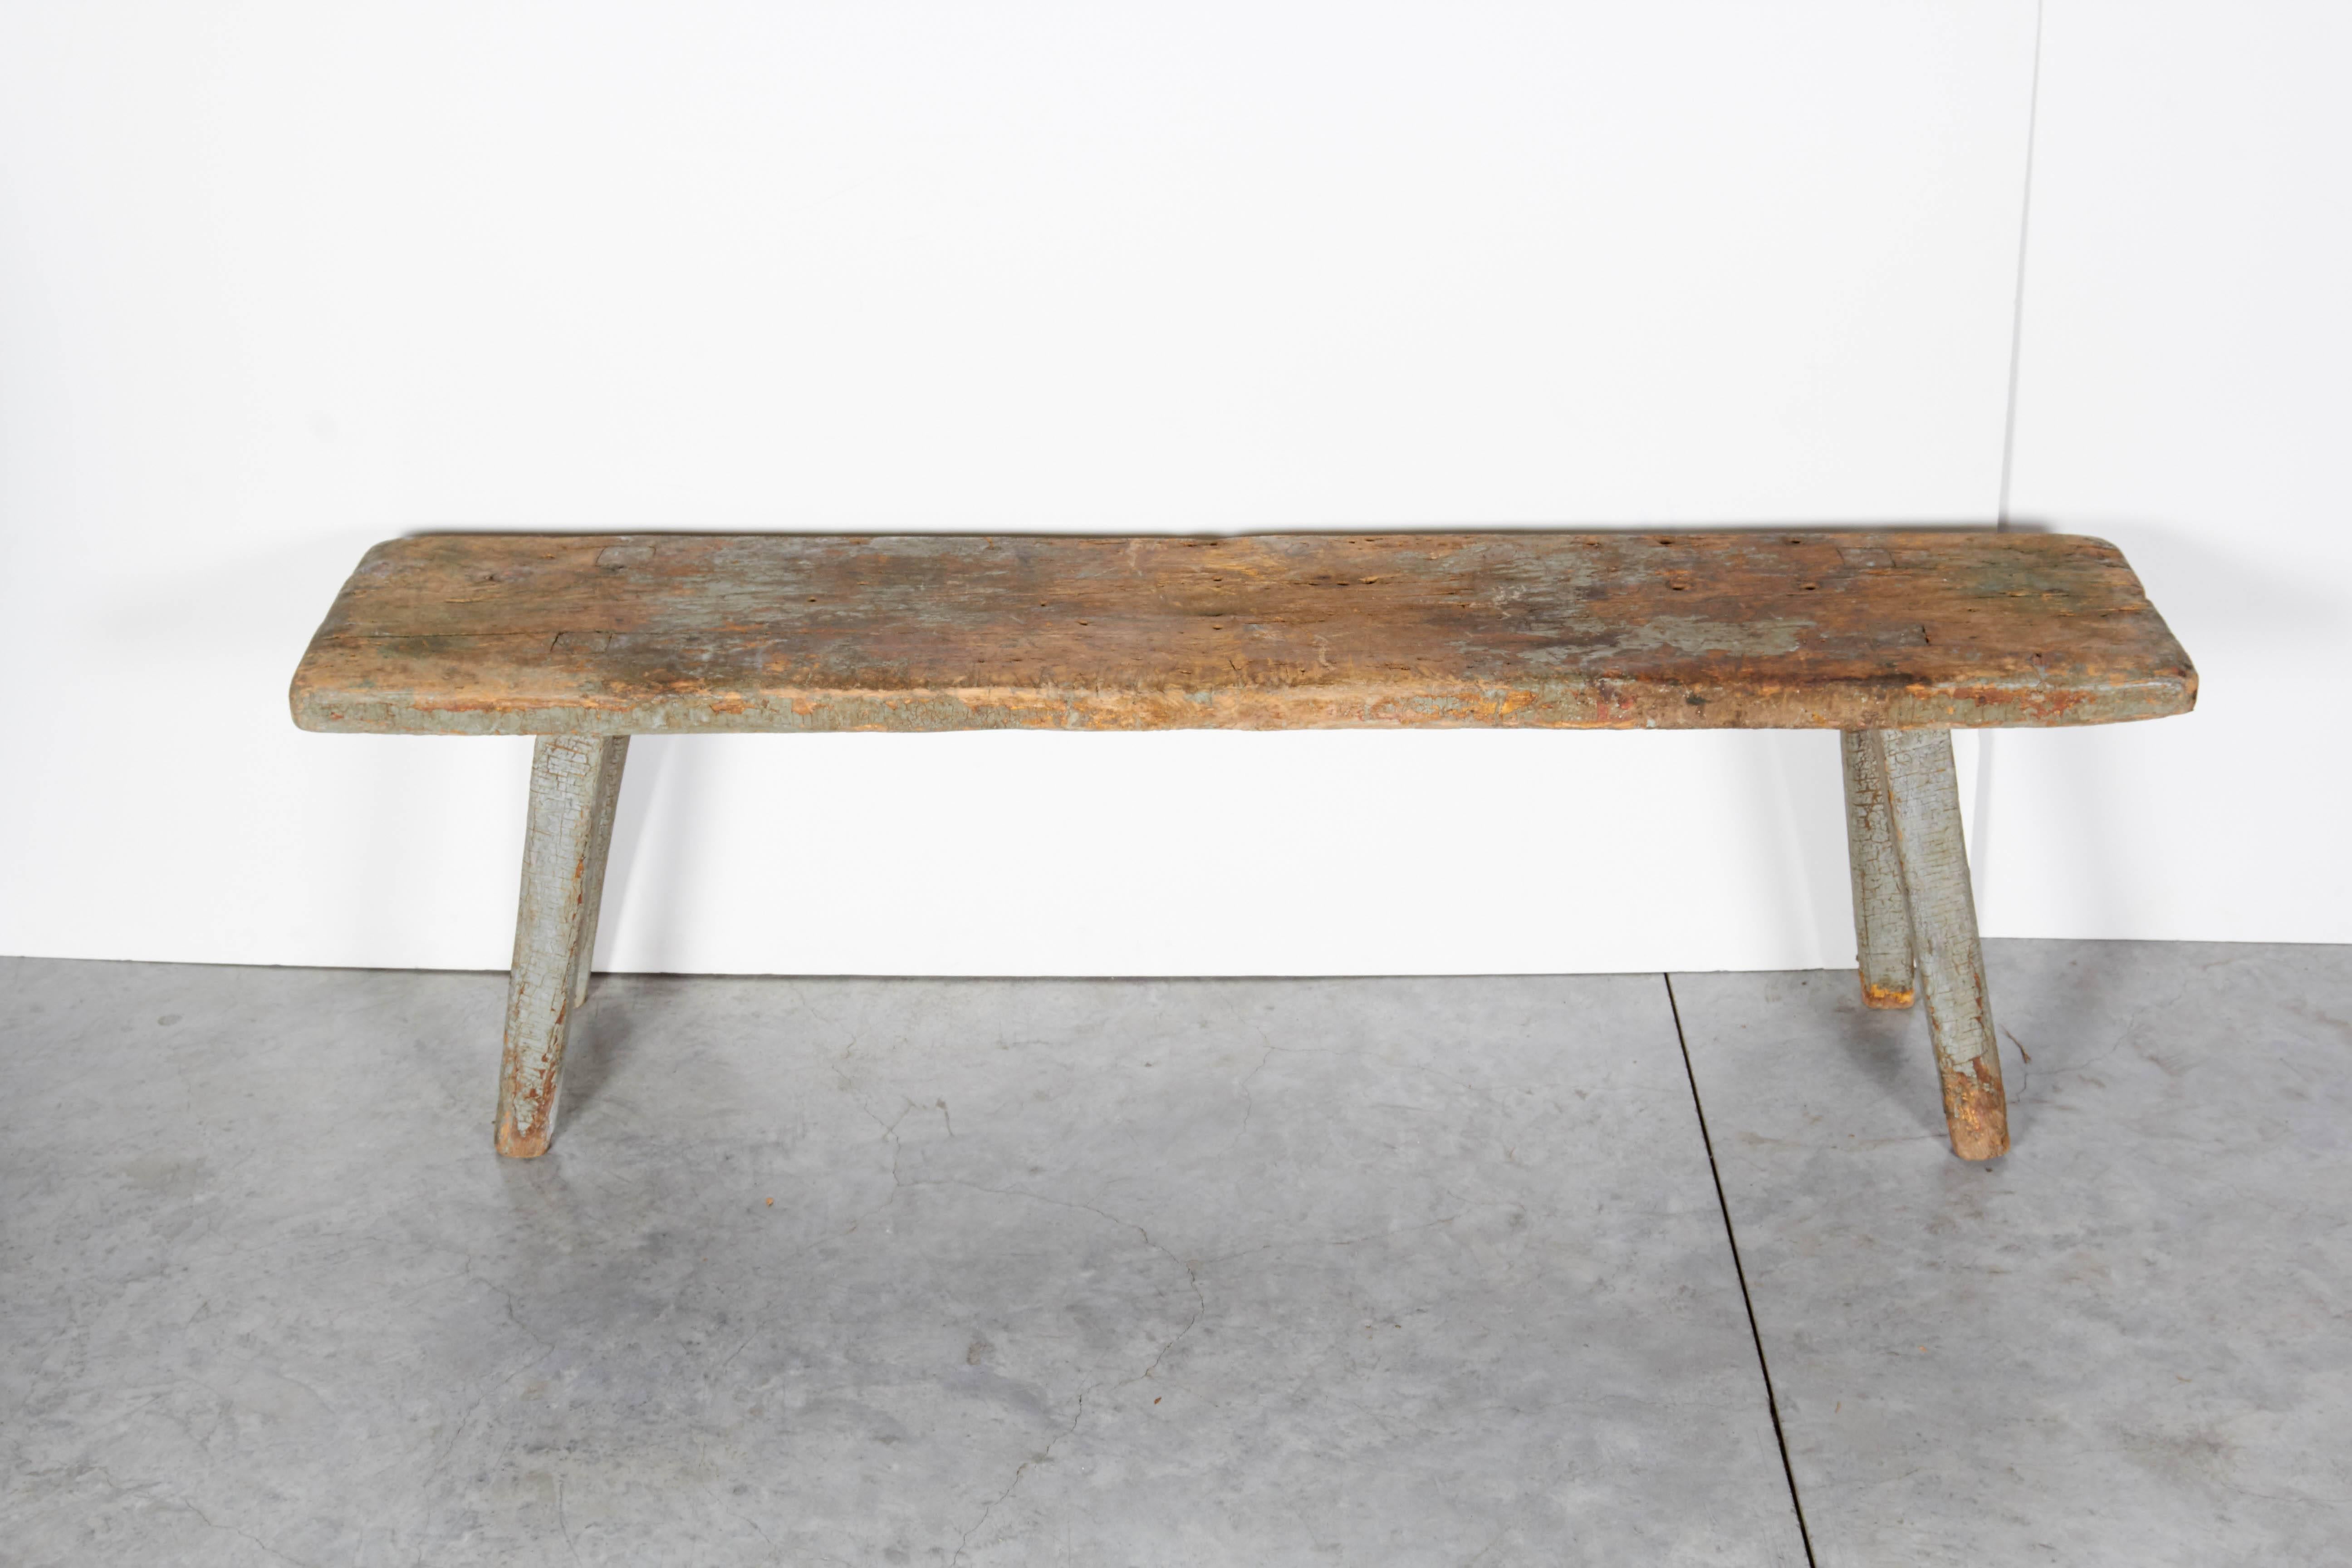 A beautiful country bench with fabulous patina reflecting it's years of use, including old nail holes and faded grayish paint. This low rustic American antique will add warmth and character to any room.
BN103.